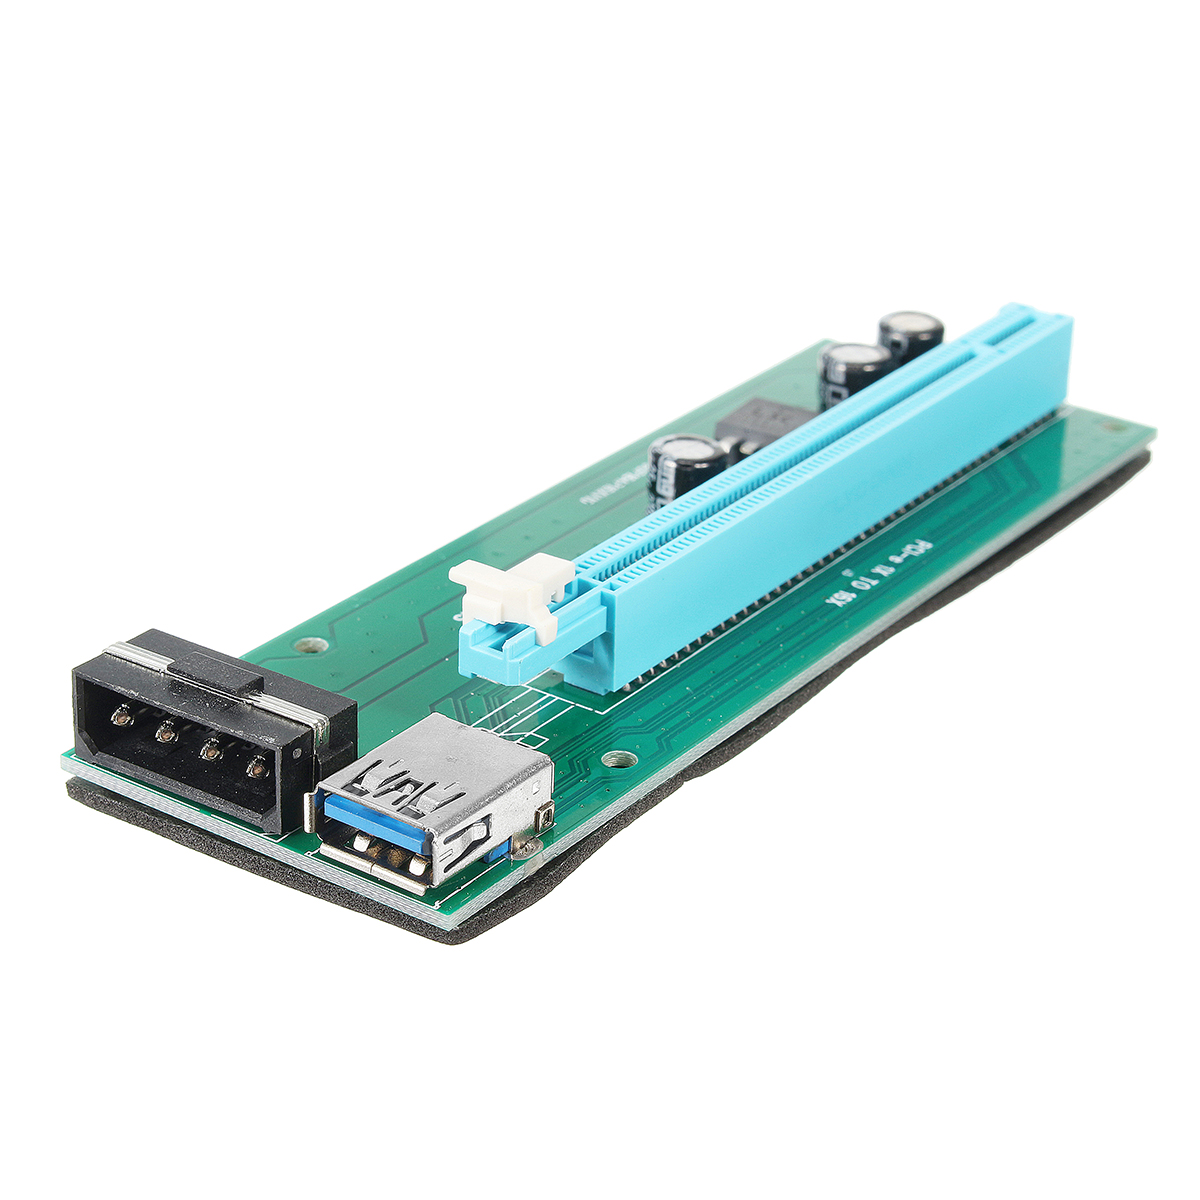 PCI-E-1X-to-16X-Mining-Machine-Enhanced-Extender-Riser-Adapter-With-Power-Cable-1972752-5